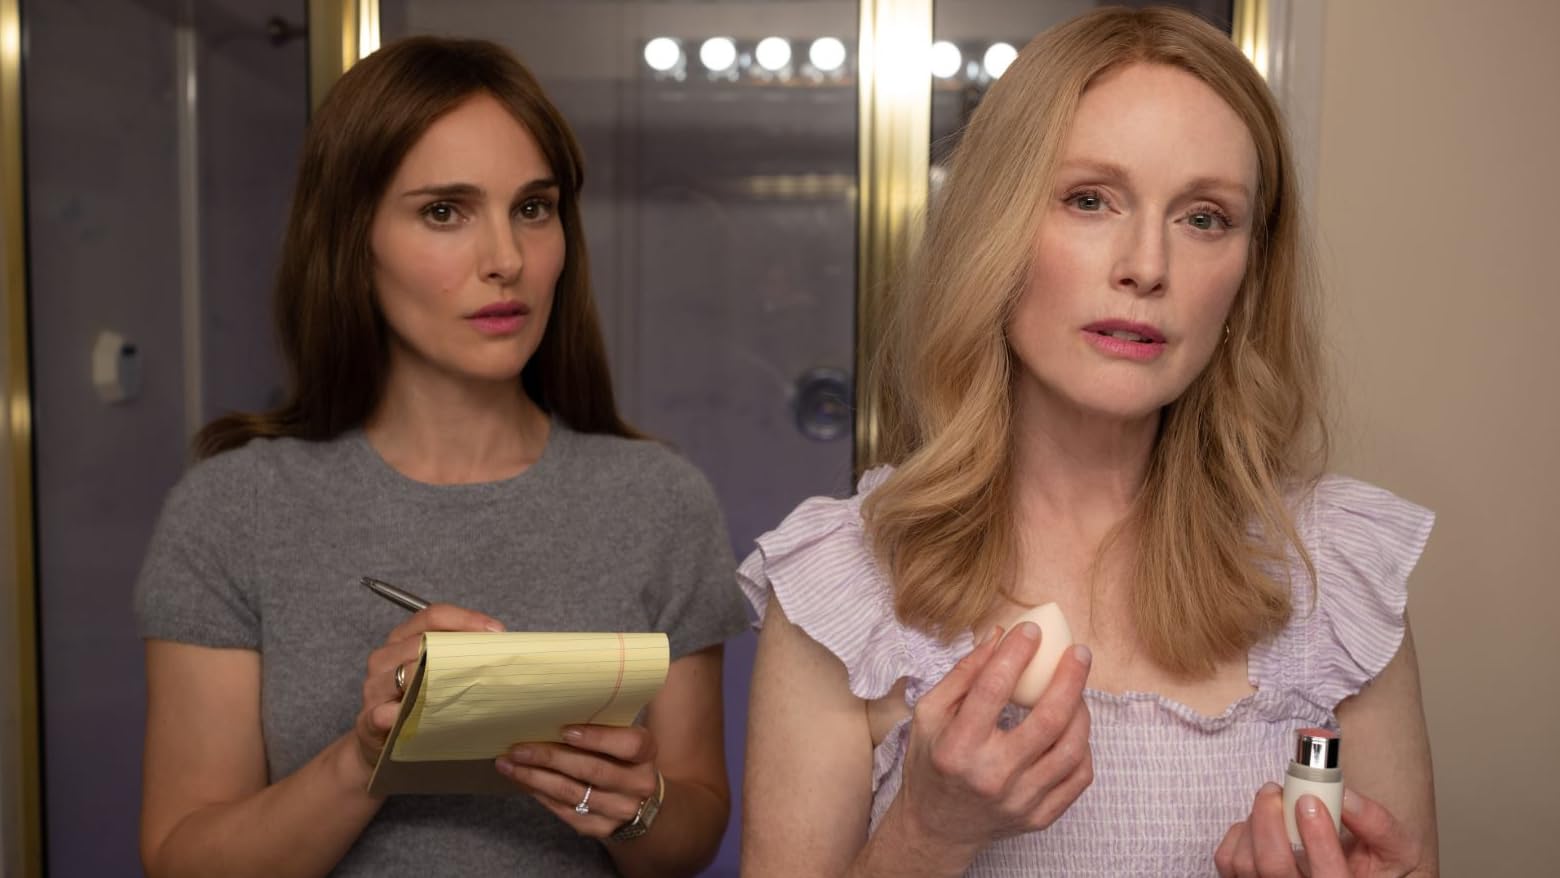 Natalie Portman takes notes while Julianne Moore does her makeup in front of a mirror in the movie May December.